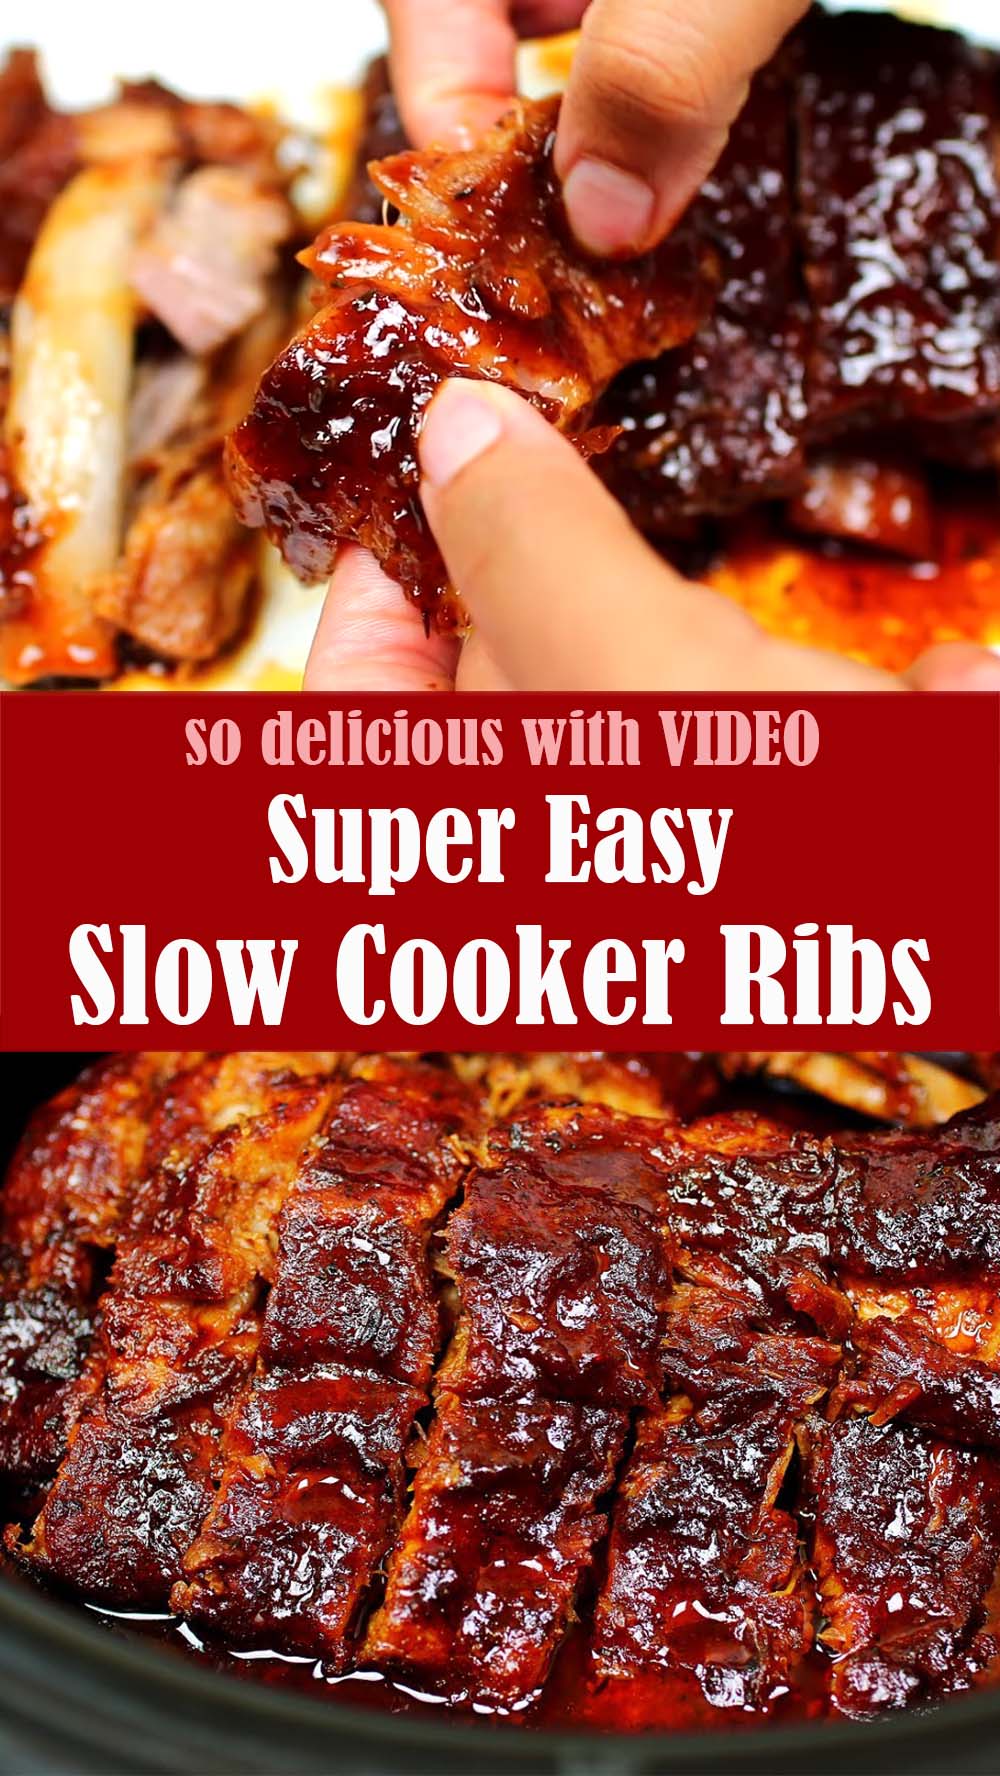 Super Easy Slow Cooker Ribs Recipe with VIDEO